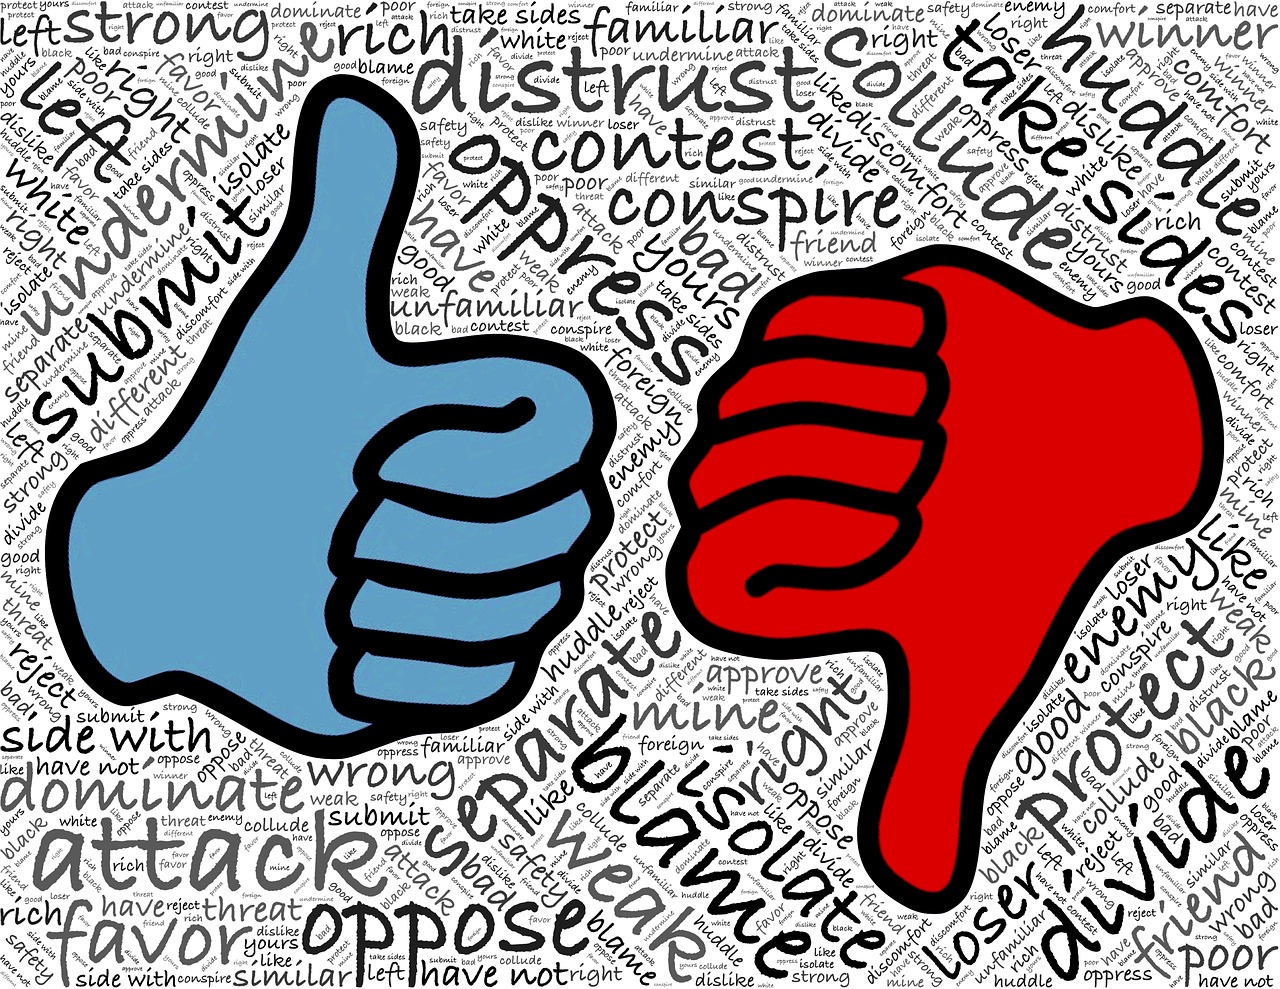 two thumbs up with words in the background, trending on pixabay, neoplasticism, political cartoon, dissipate!!, blue or red, broken composition